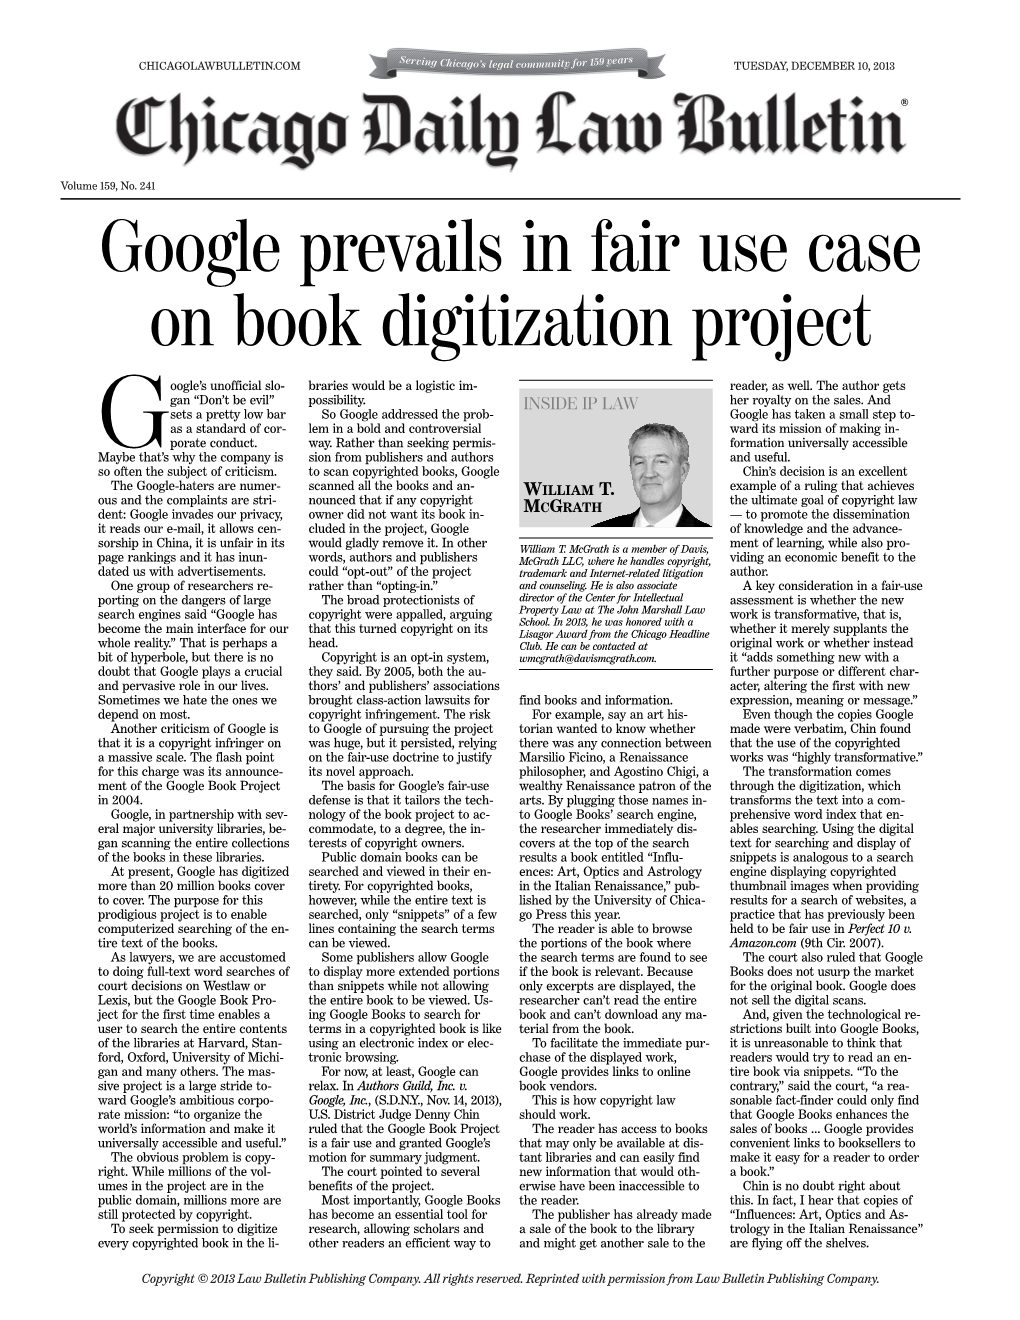 Google Prevails in Fair Use Case on Book Digitization Project